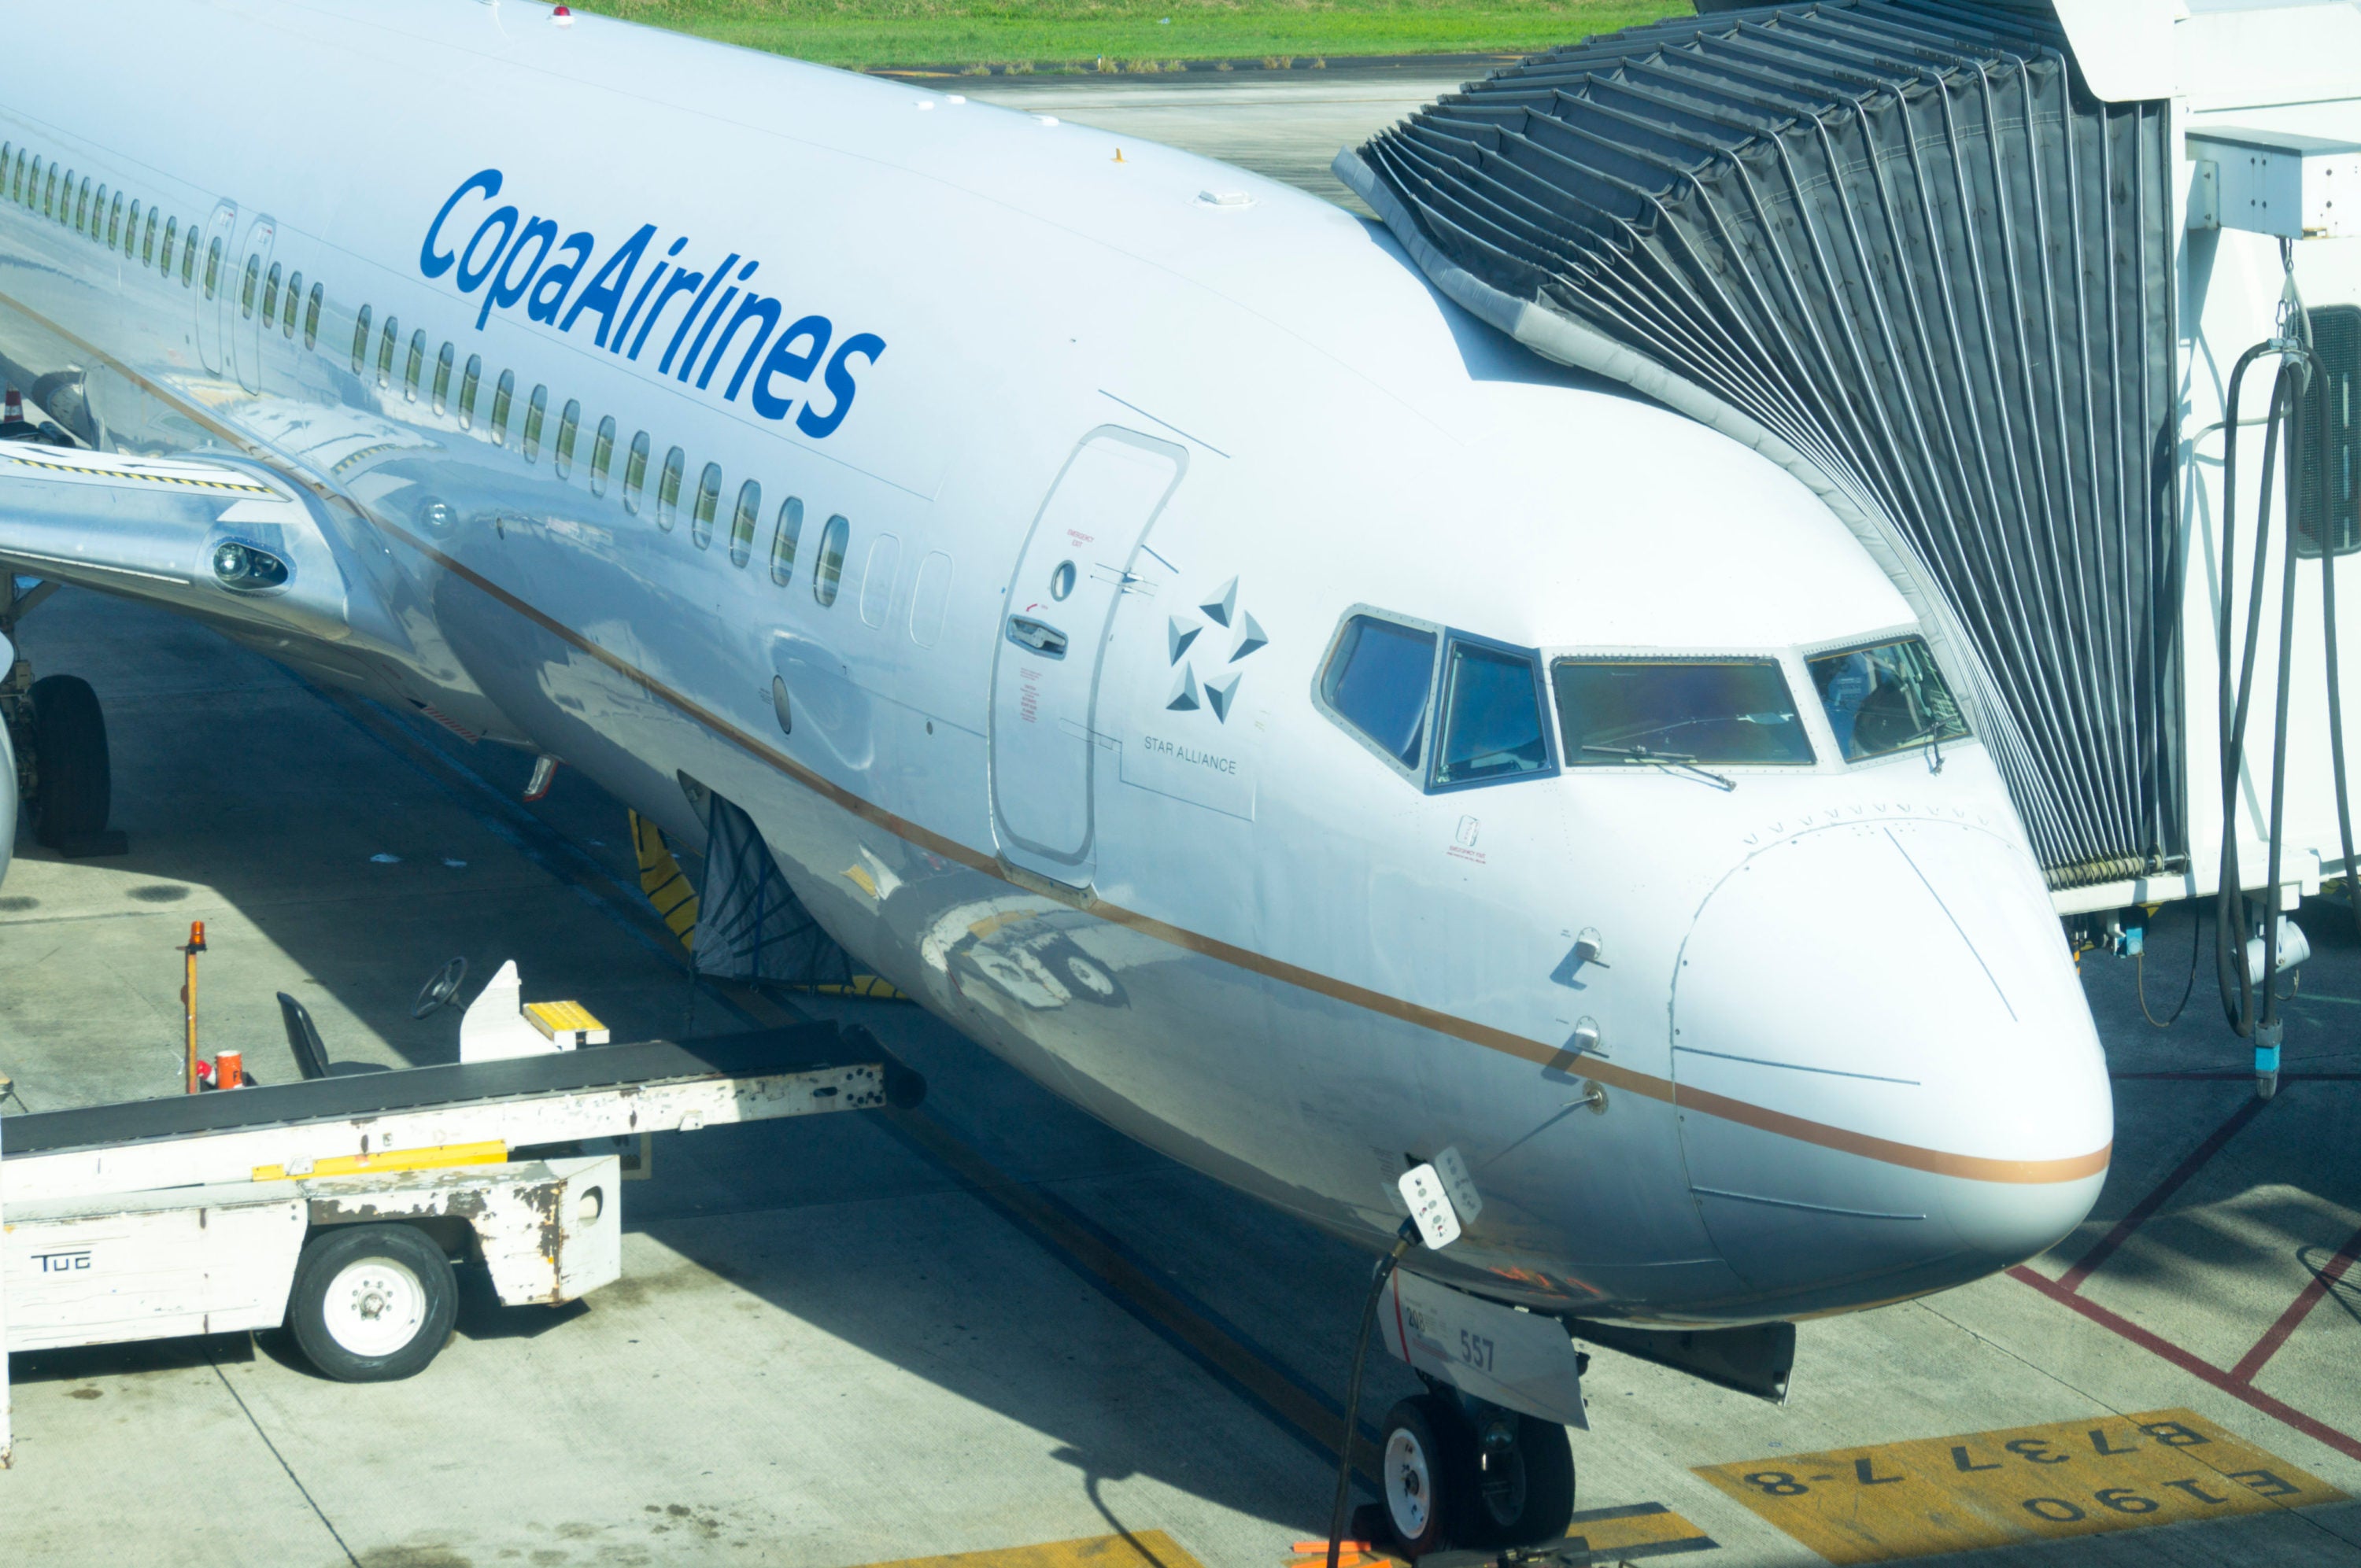 Guide to Copa Airlines status